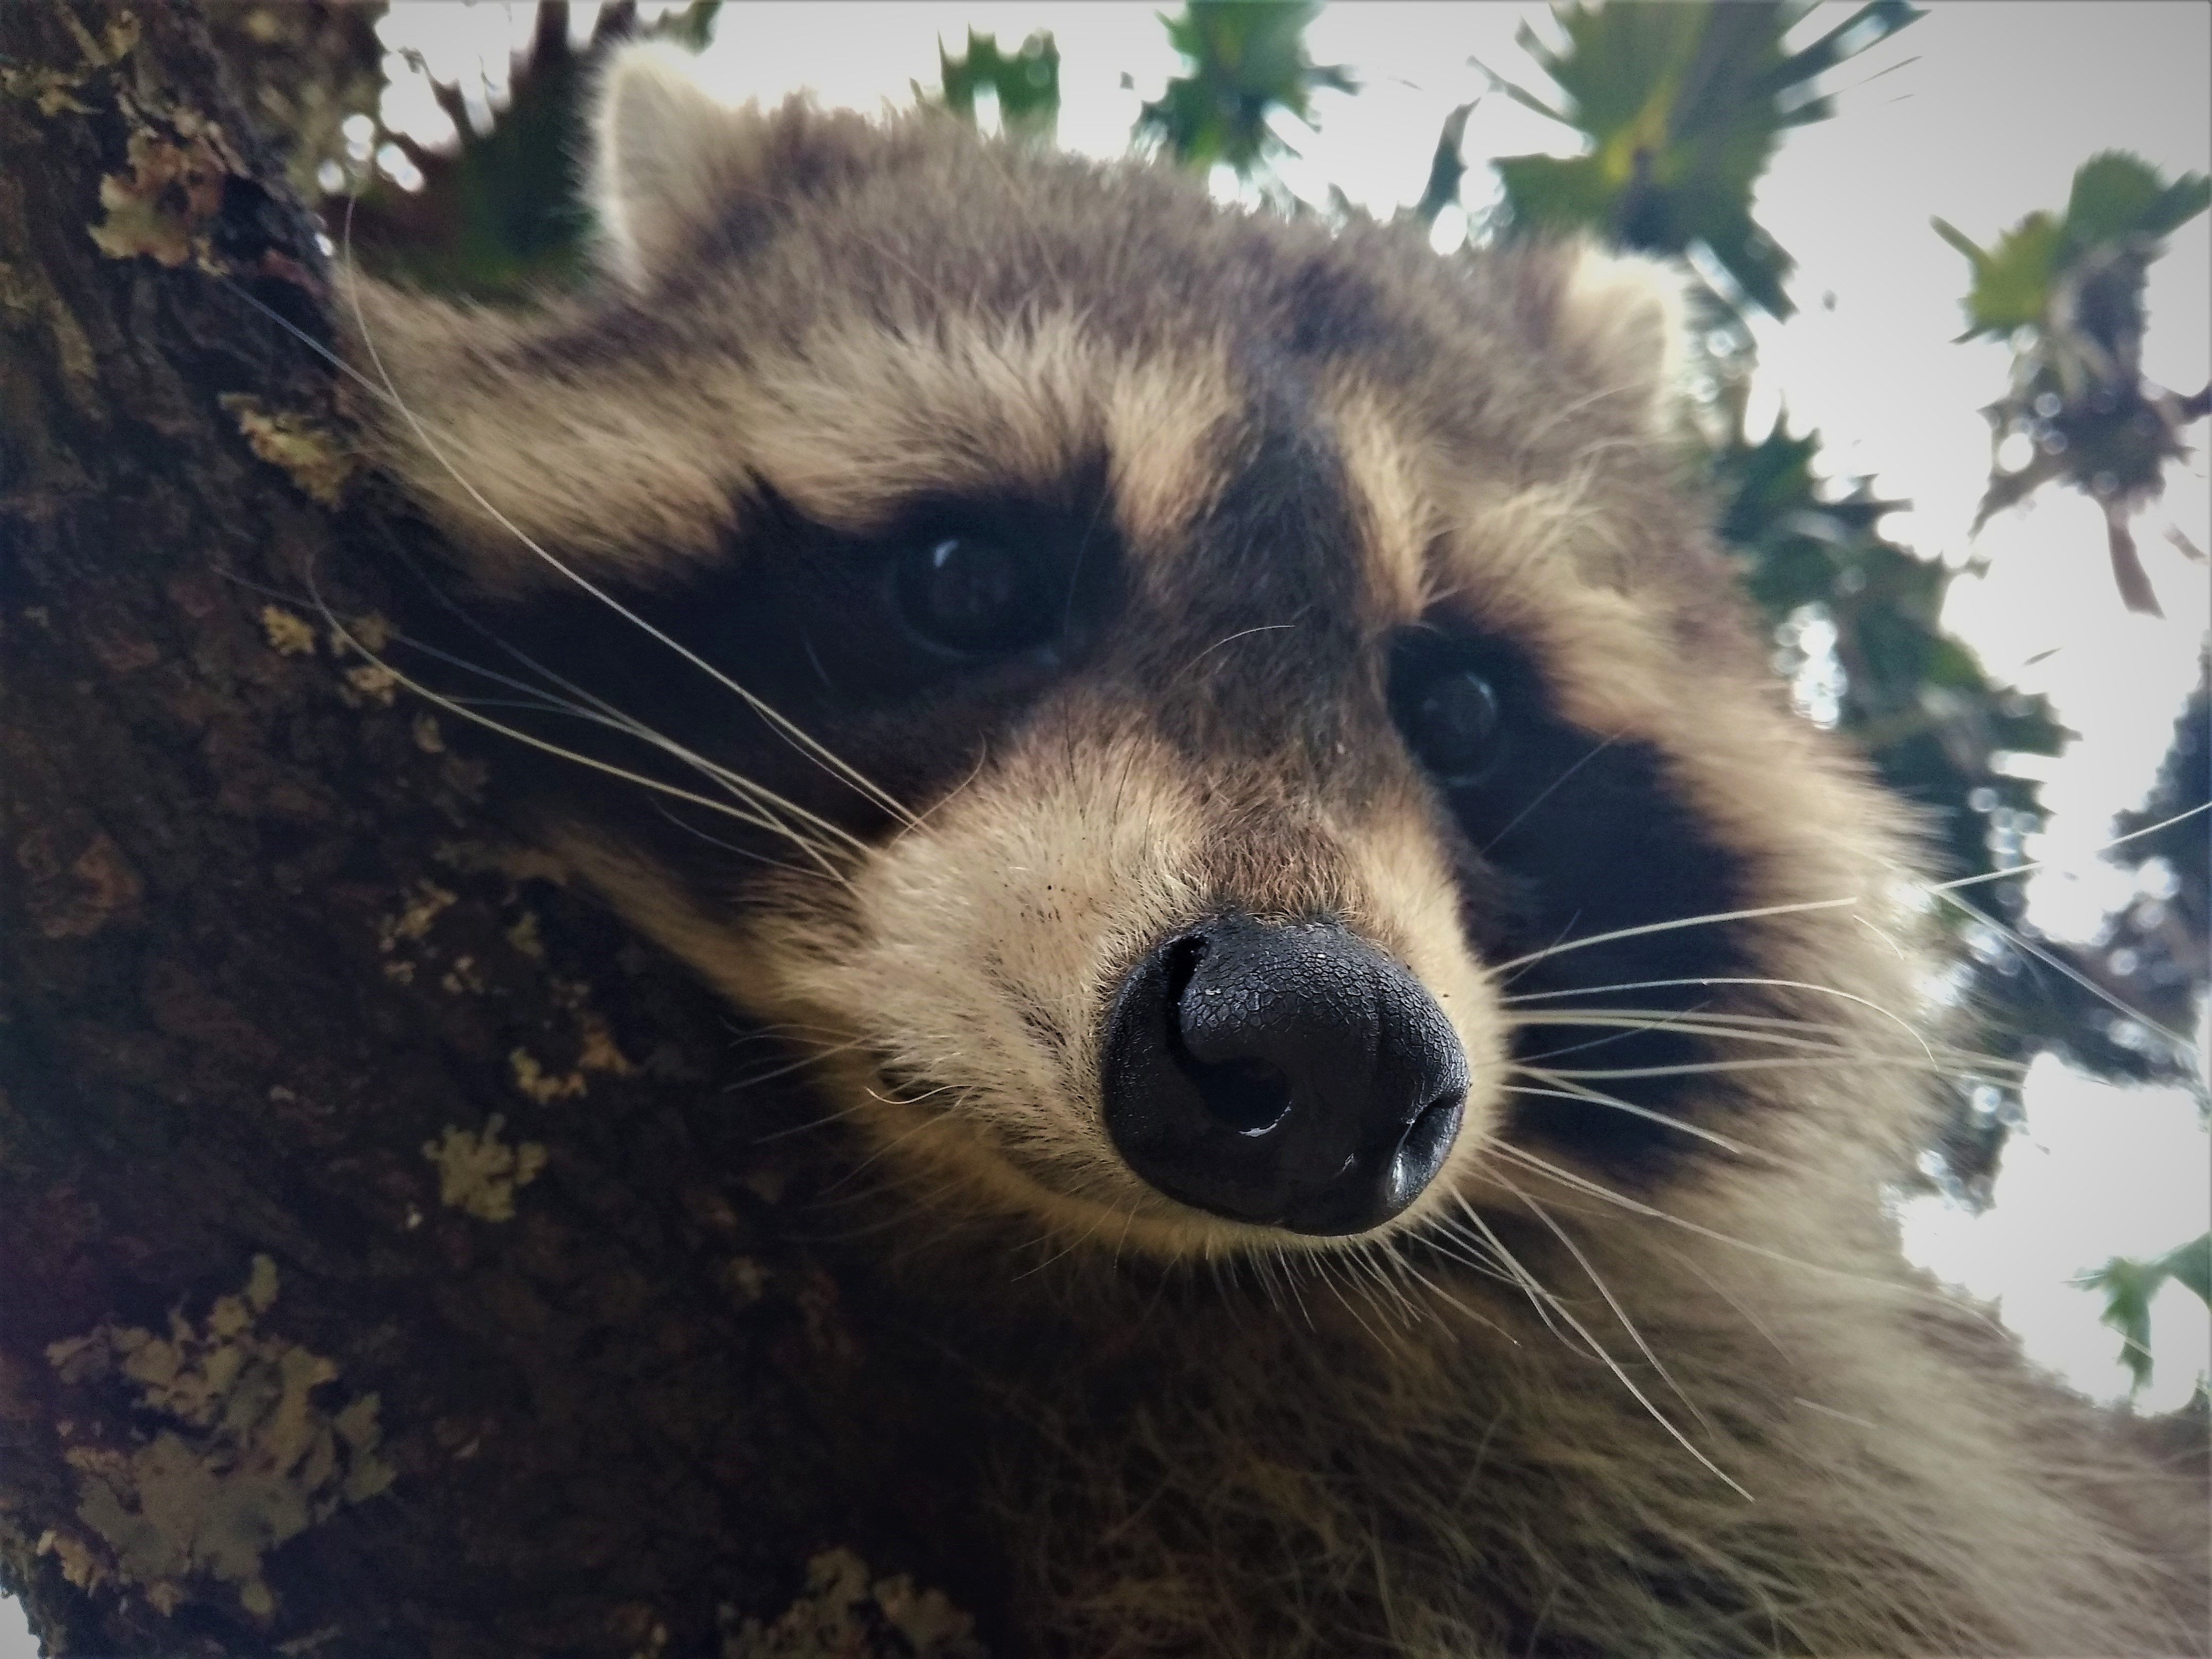 Who is this mysterious animal with a mask? Is it Zorro? No, it is a  raccoon! -